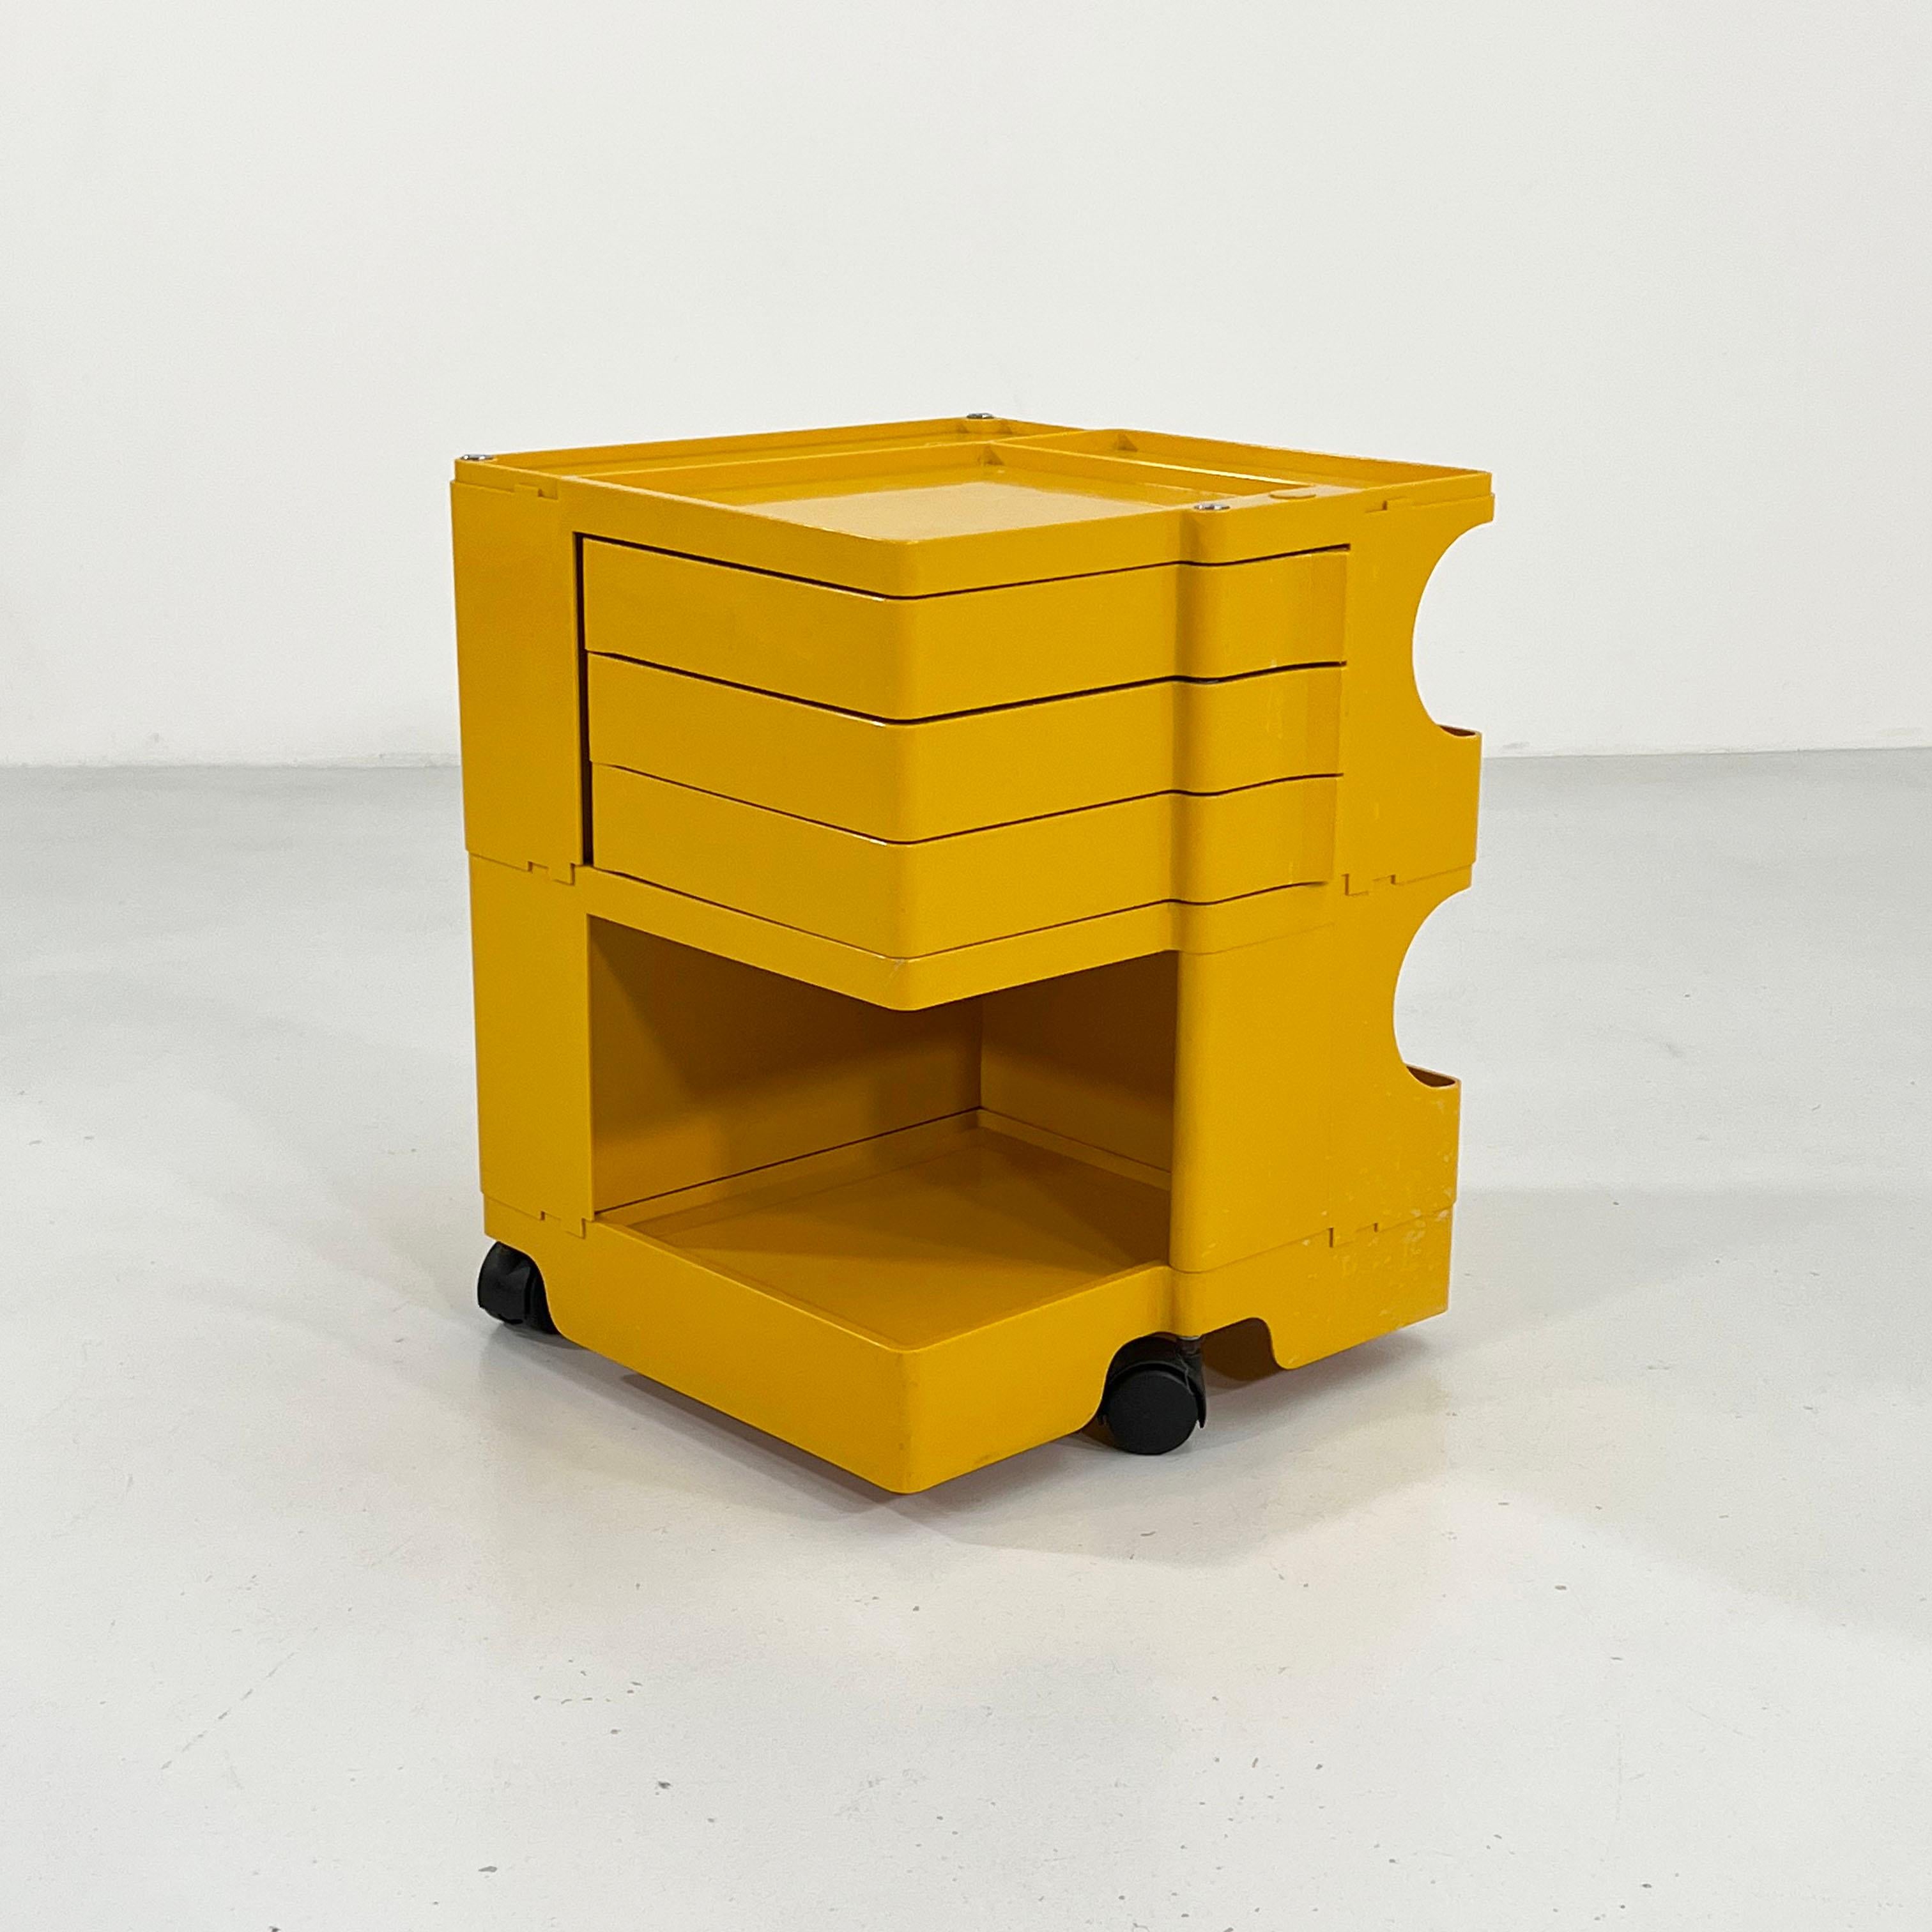 Designer - Joe Colombo 
Producer - Bieffeplast
Model - Boby Trolley
Design Period - Sixties
Measurements - Width 41 cm x Depth 44 cm x Height 52 cm
Materials - Plastic
Color - Yellow
Light wear consistent with age and use.
Comments - Light wear